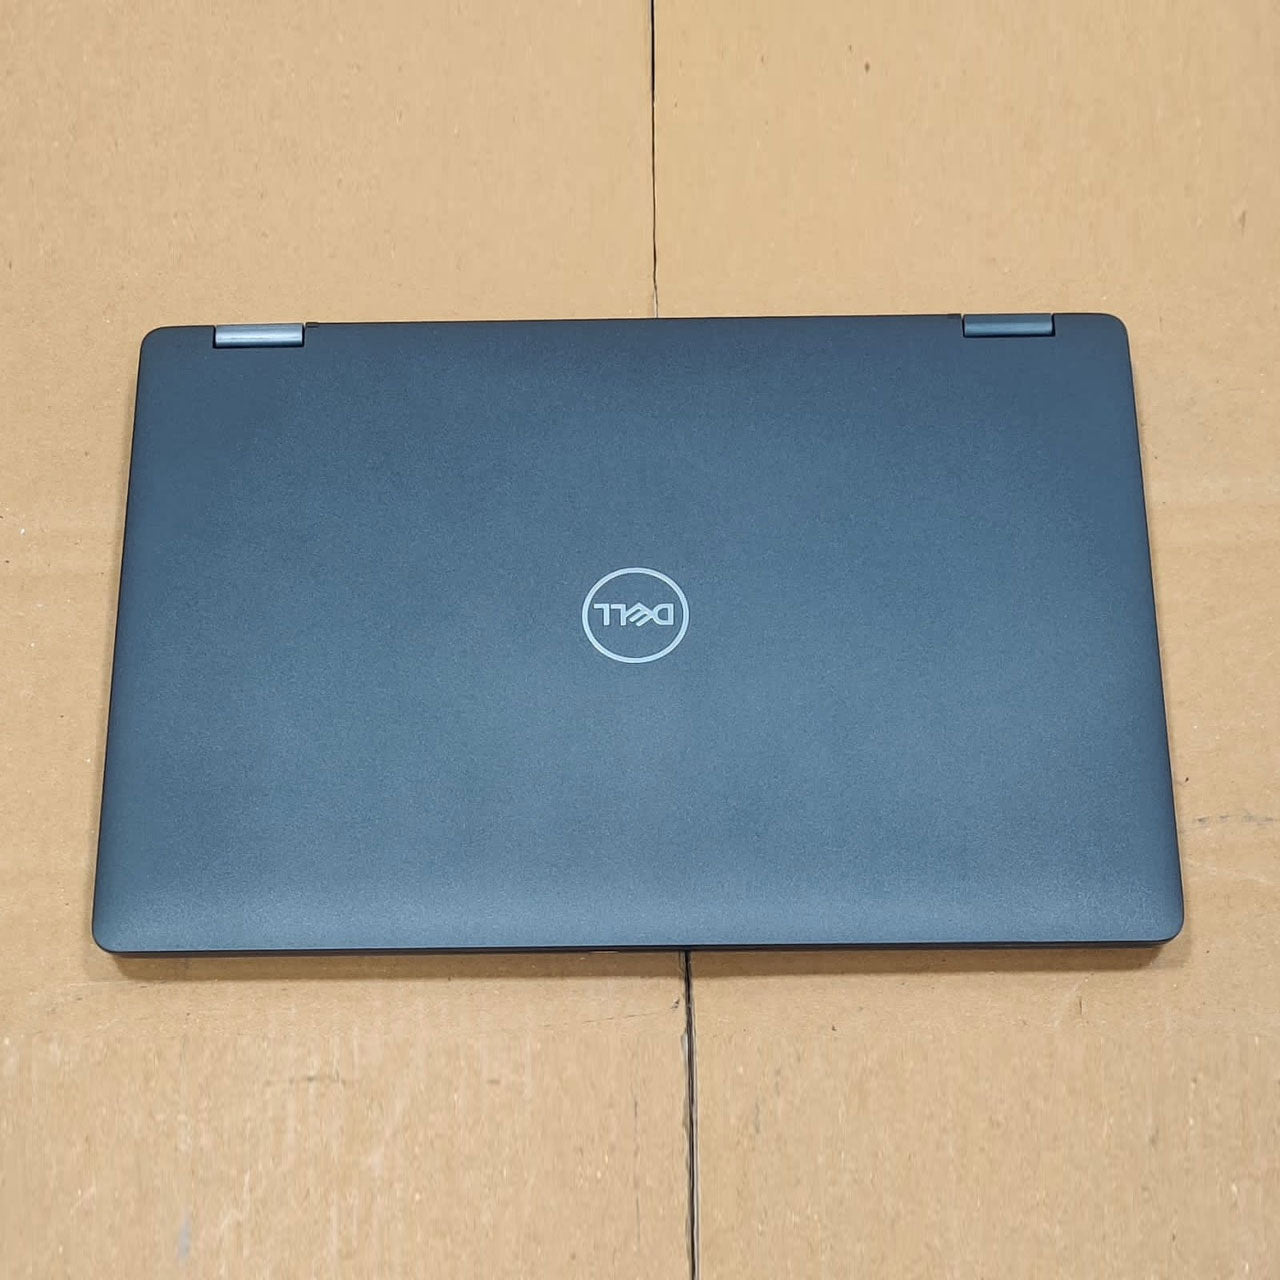 Dell 5300 | Intel Core i5 8th Gen | 8GB RAM | 256GB SSD | 13.3" Touch Screen With 360 Rotate